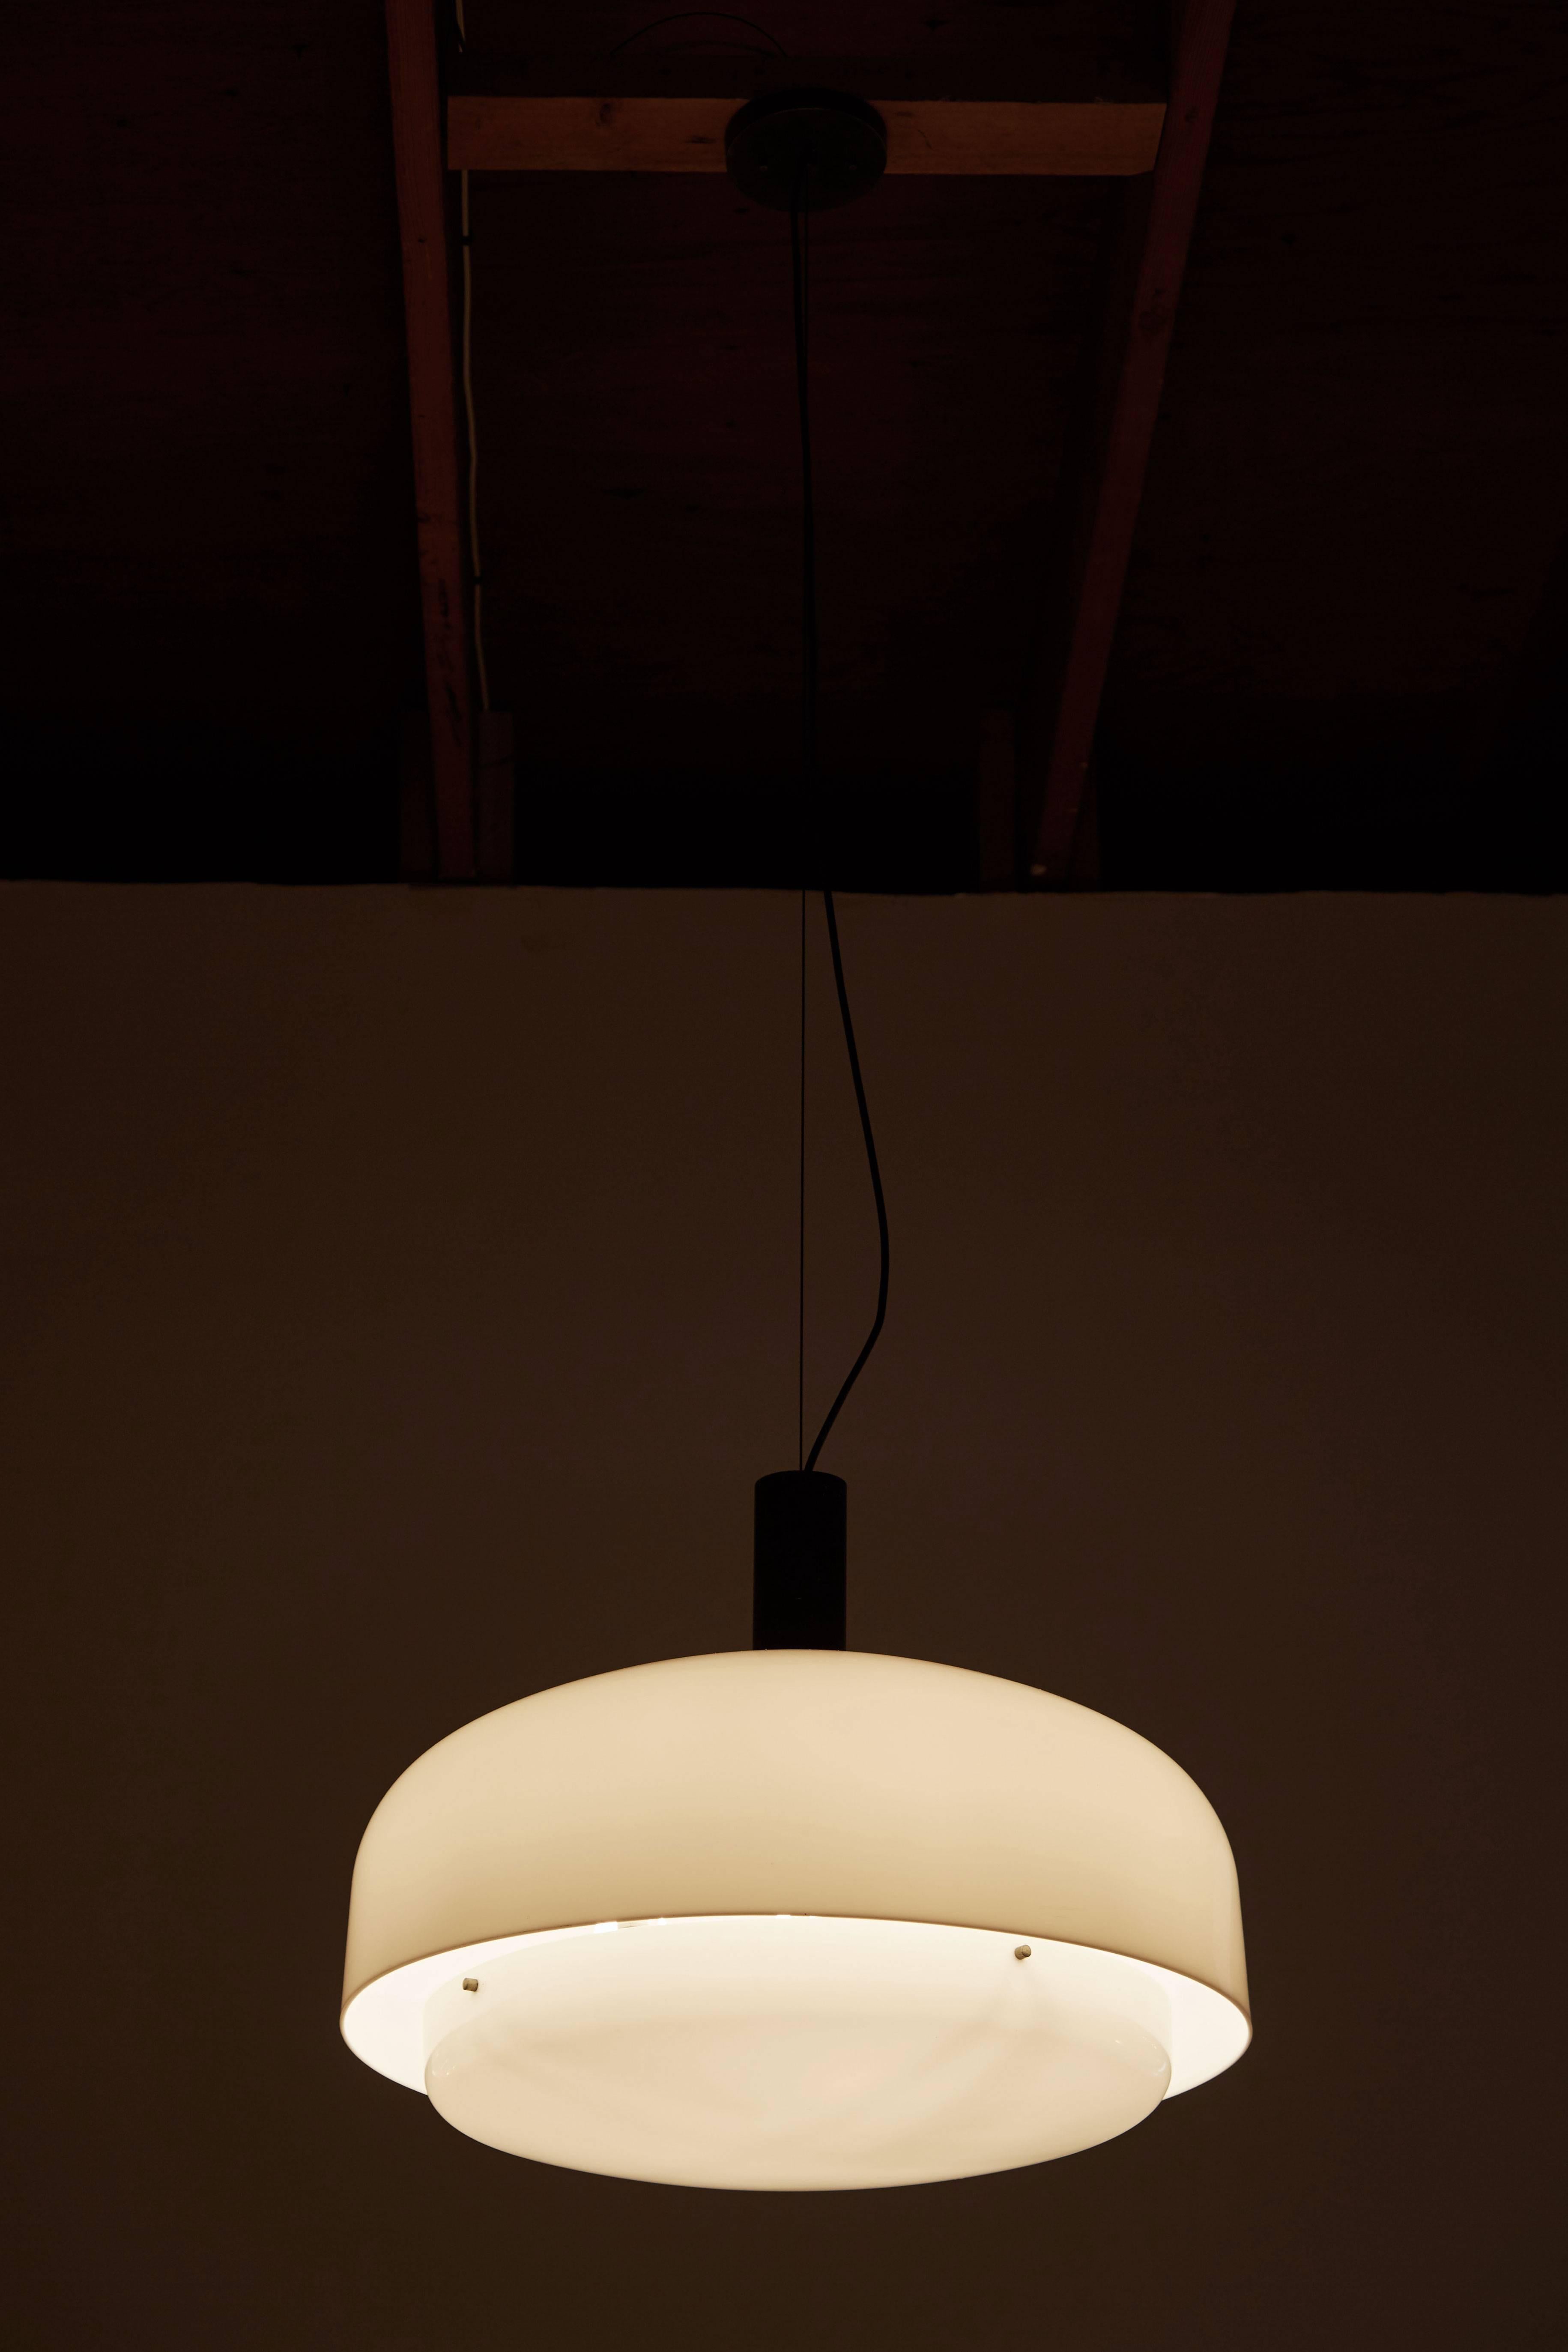 Suspension Light by Eugenio Gentile Tedeschi for Kartell designed in Italy in 1962. Made of metal and perspex (acrylic) shade and diffuser. Wired for US junction box. Takes an E27 75w maximum bulb. Overall drop can be adjusted.
A ceiling lamp by E.